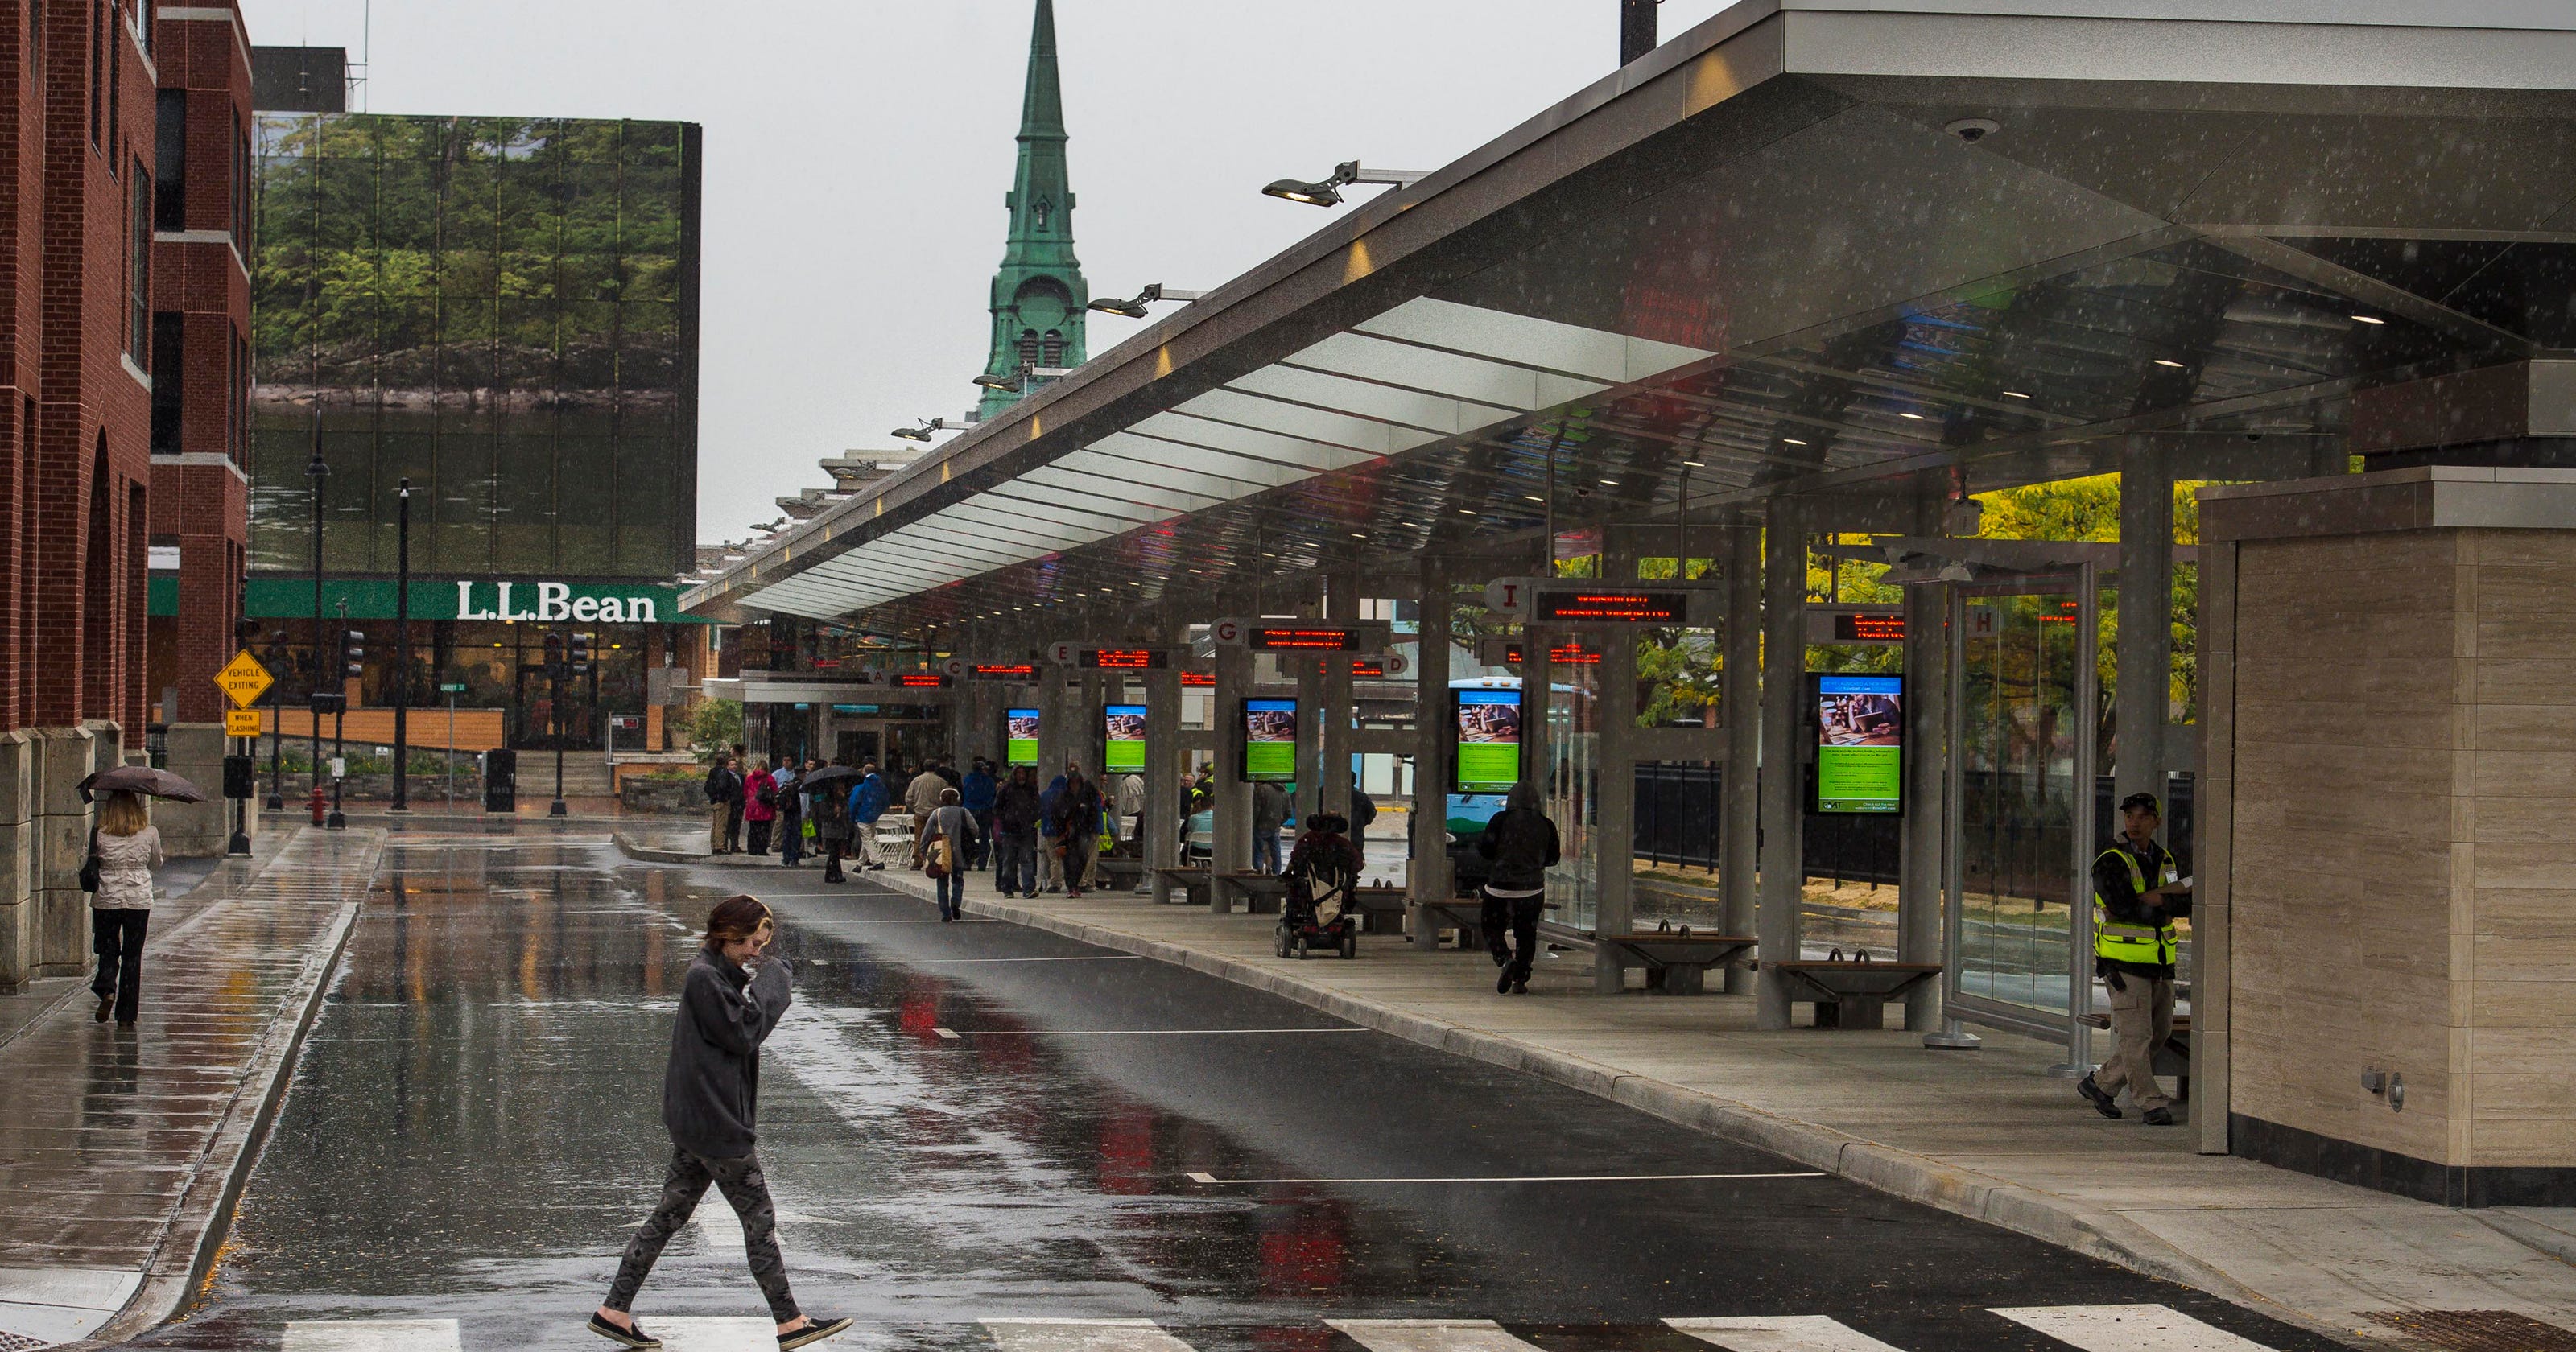 architecture now and The Future: BUS STATION BY BLUNCK+MORGEN ARCHITEKTEN